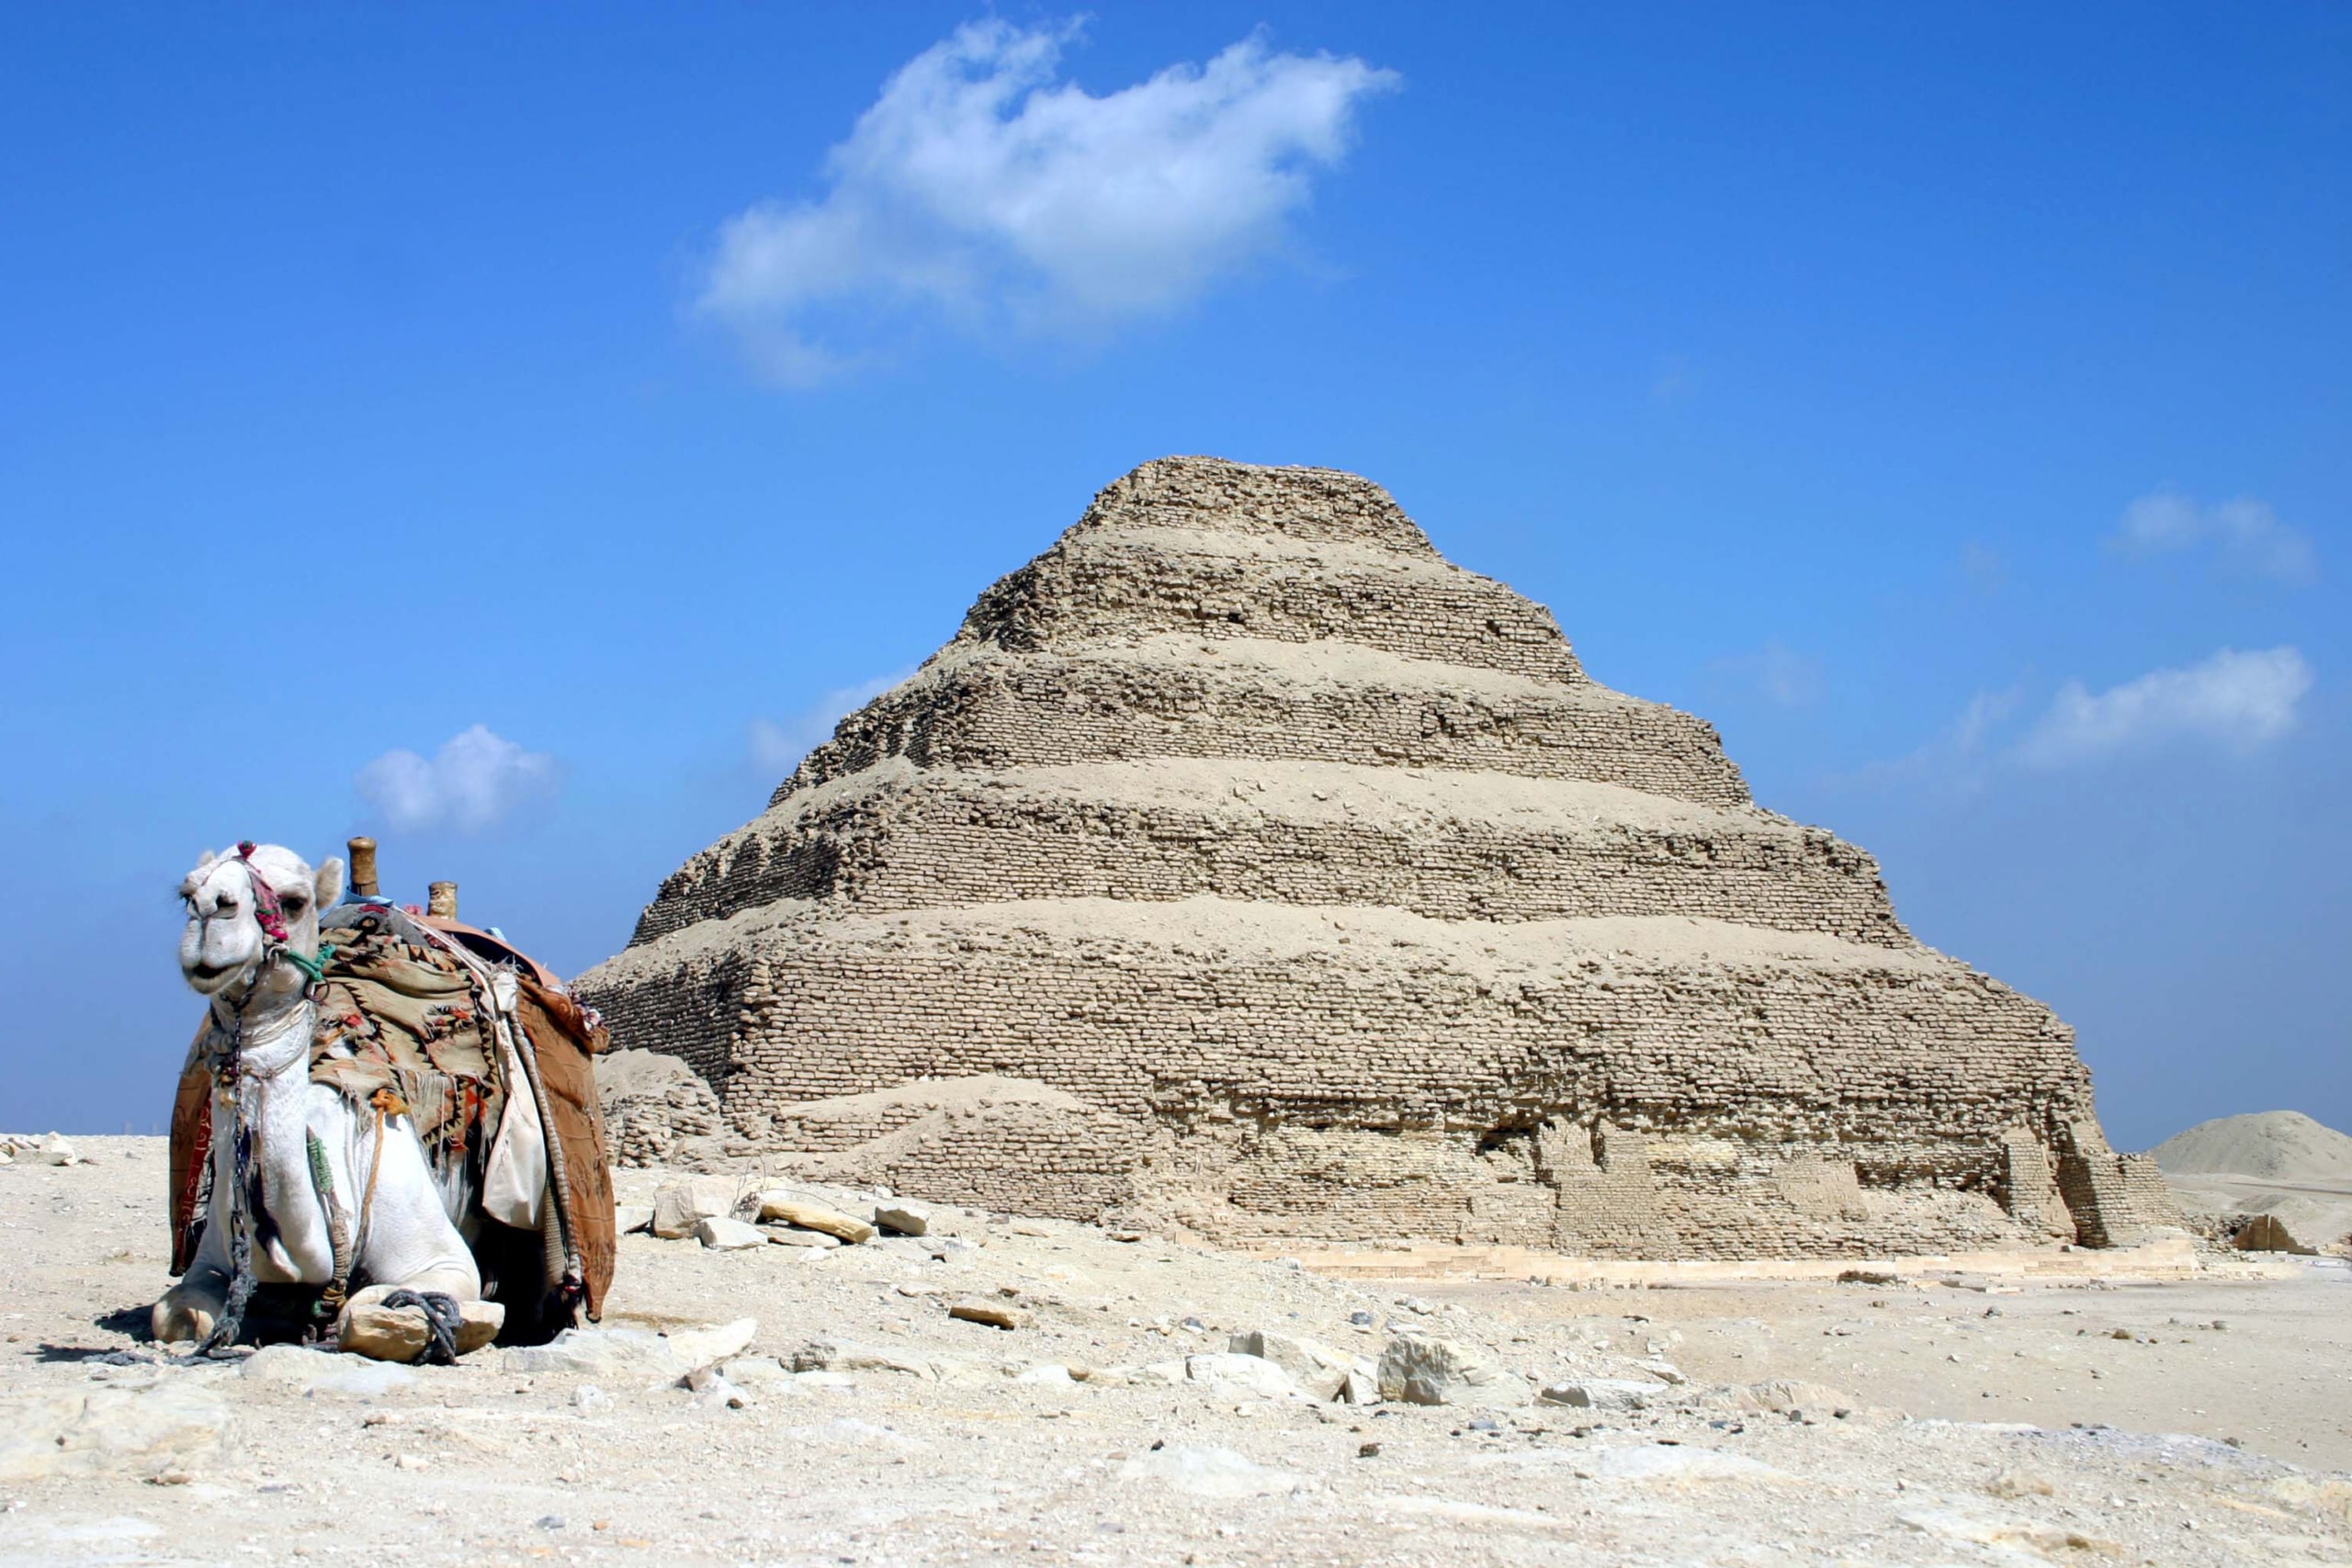 a camel sits in front of a pyramid